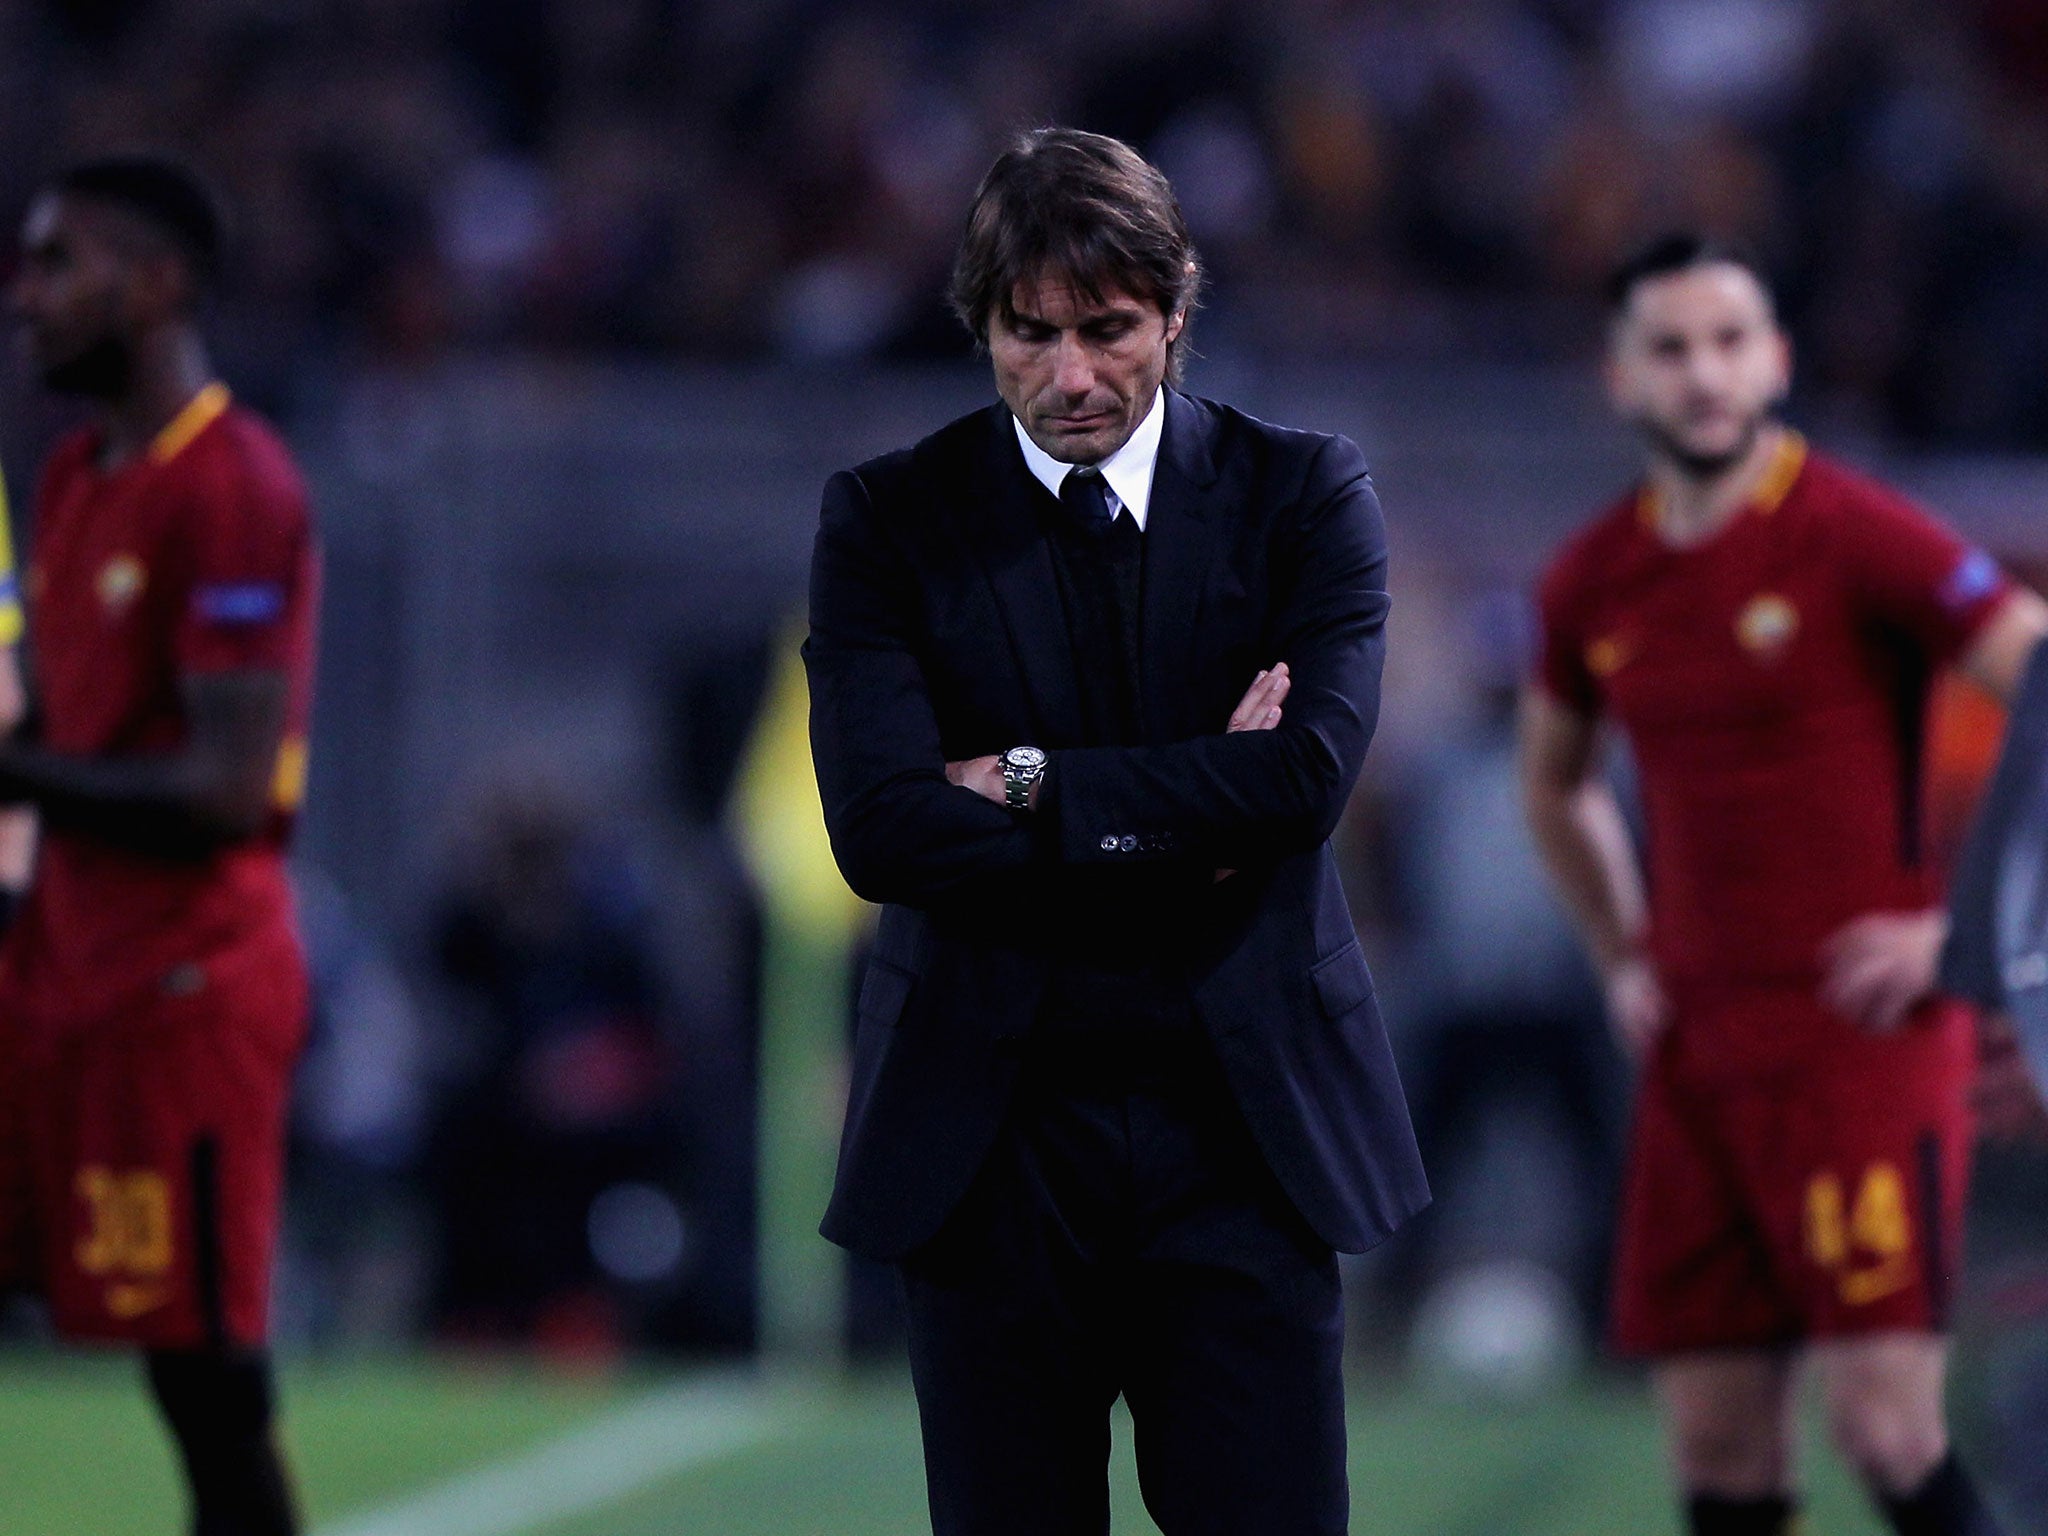 Antonio Conte looks on after the final whistle in Rome